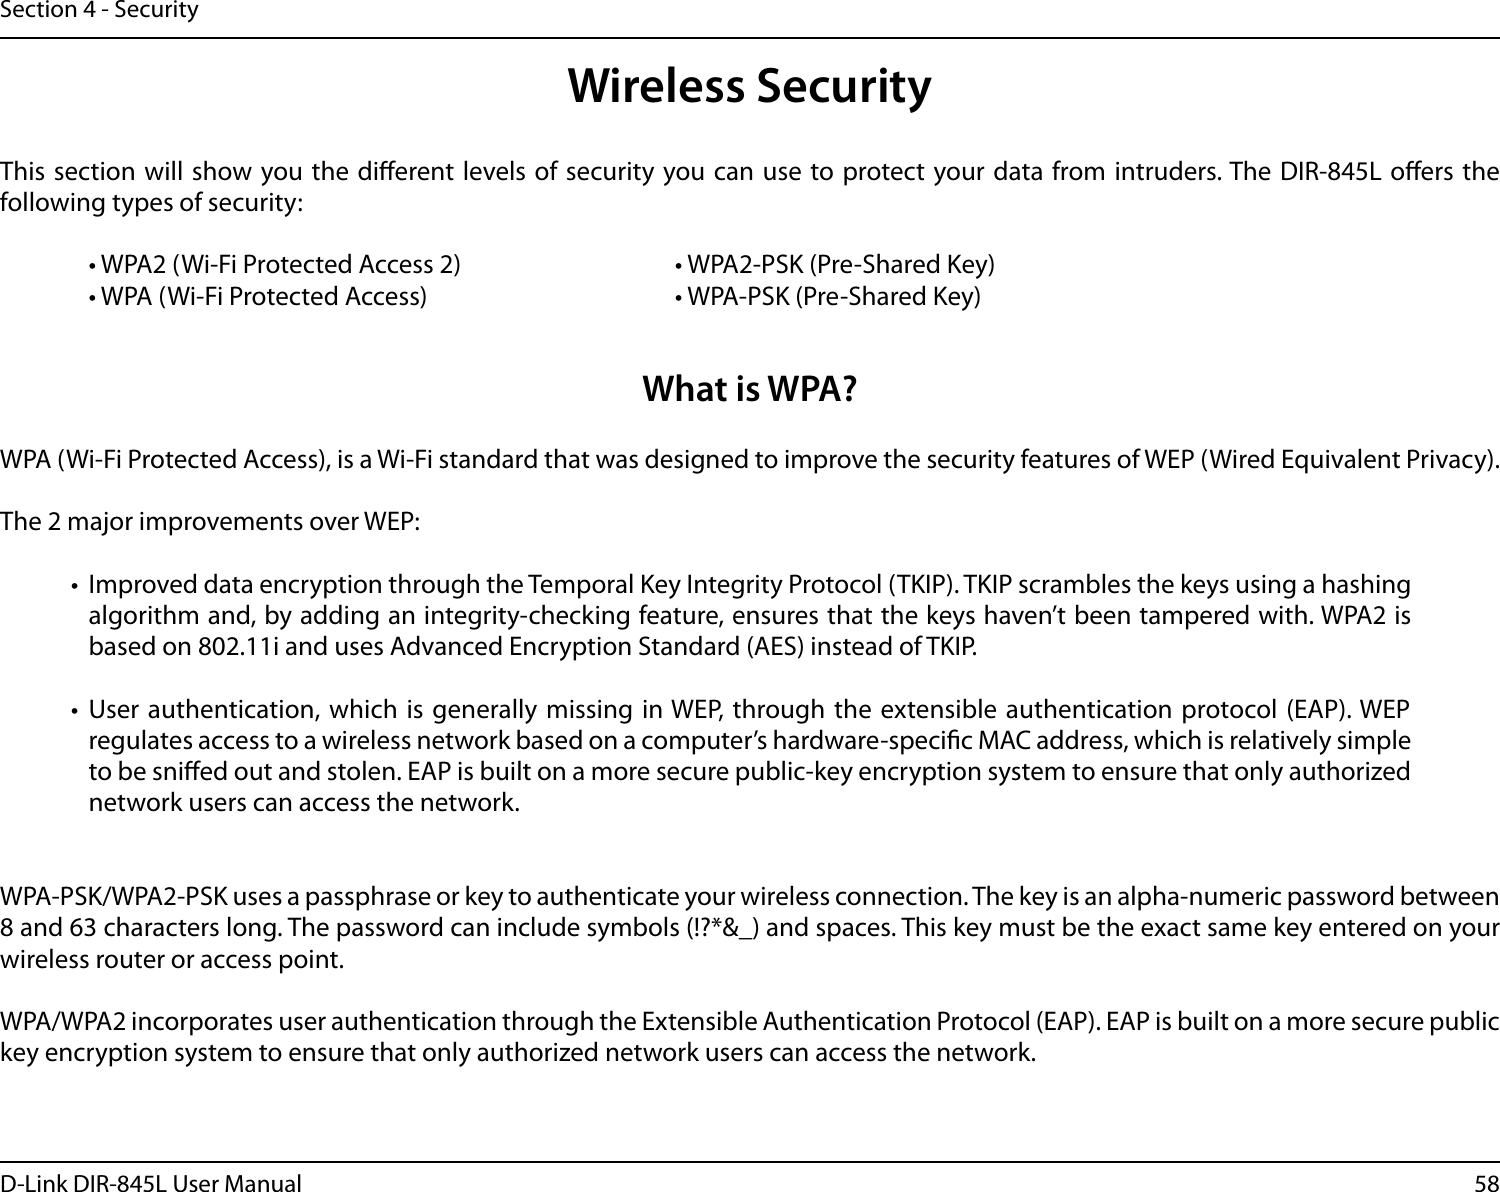 58D-Link DIR-845L User ManualSection 4 - SecurityWireless SecurityThis section will  show you the dierent levels of security  you can use to protect your data from intruders. The DIR-845L oers the following types of security:  • WPA2 (Wi-Fi Protected Access 2)       • WPA2-PSK (Pre-Shared Key)  • WPA (Wi-Fi Protected Access)        • WPA-PSK (Pre-Shared Key)What is WPA?WPA (Wi-Fi Protected Access), is a Wi-Fi standard that was designed to improve the security features of WEP (Wired Equivalent Privacy).  The 2 major improvements over WEP: •  Improved data encryption through the Temporal Key Integrity Protocol (TKIP). TKIP scrambles the keys using a hashing algorithm and, by adding an integrity-checking feature, ensures that the keys haven’t been tampered with. WPA2 is based on 802.11i and uses Advanced Encryption Standard (AES) instead of TKIP.•  User authentication, which is generally missing in WEP, through the  extensible authentication protocol (EAP). WEP regulates access to a wireless network based on a computer’s hardware-specic MAC address, which is relatively simple to be snied out and stolen. EAP is built on a more secure public-key encryption system to ensure that only authorized network users can access the network.WPA-PSK/WPA2-PSK uses a passphrase or key to authenticate your wireless connection. The key is an alpha-numeric password between 8 and 63 characters long. The password can include symbols (!?*&amp;_) and spaces. This key must be the exact same key entered on your wireless router or access point.WPA/WPA2 incorporates user authentication through the Extensible Authentication Protocol (EAP). EAP is built on a more secure public key encryption system to ensure that only authorized network users can access the network.